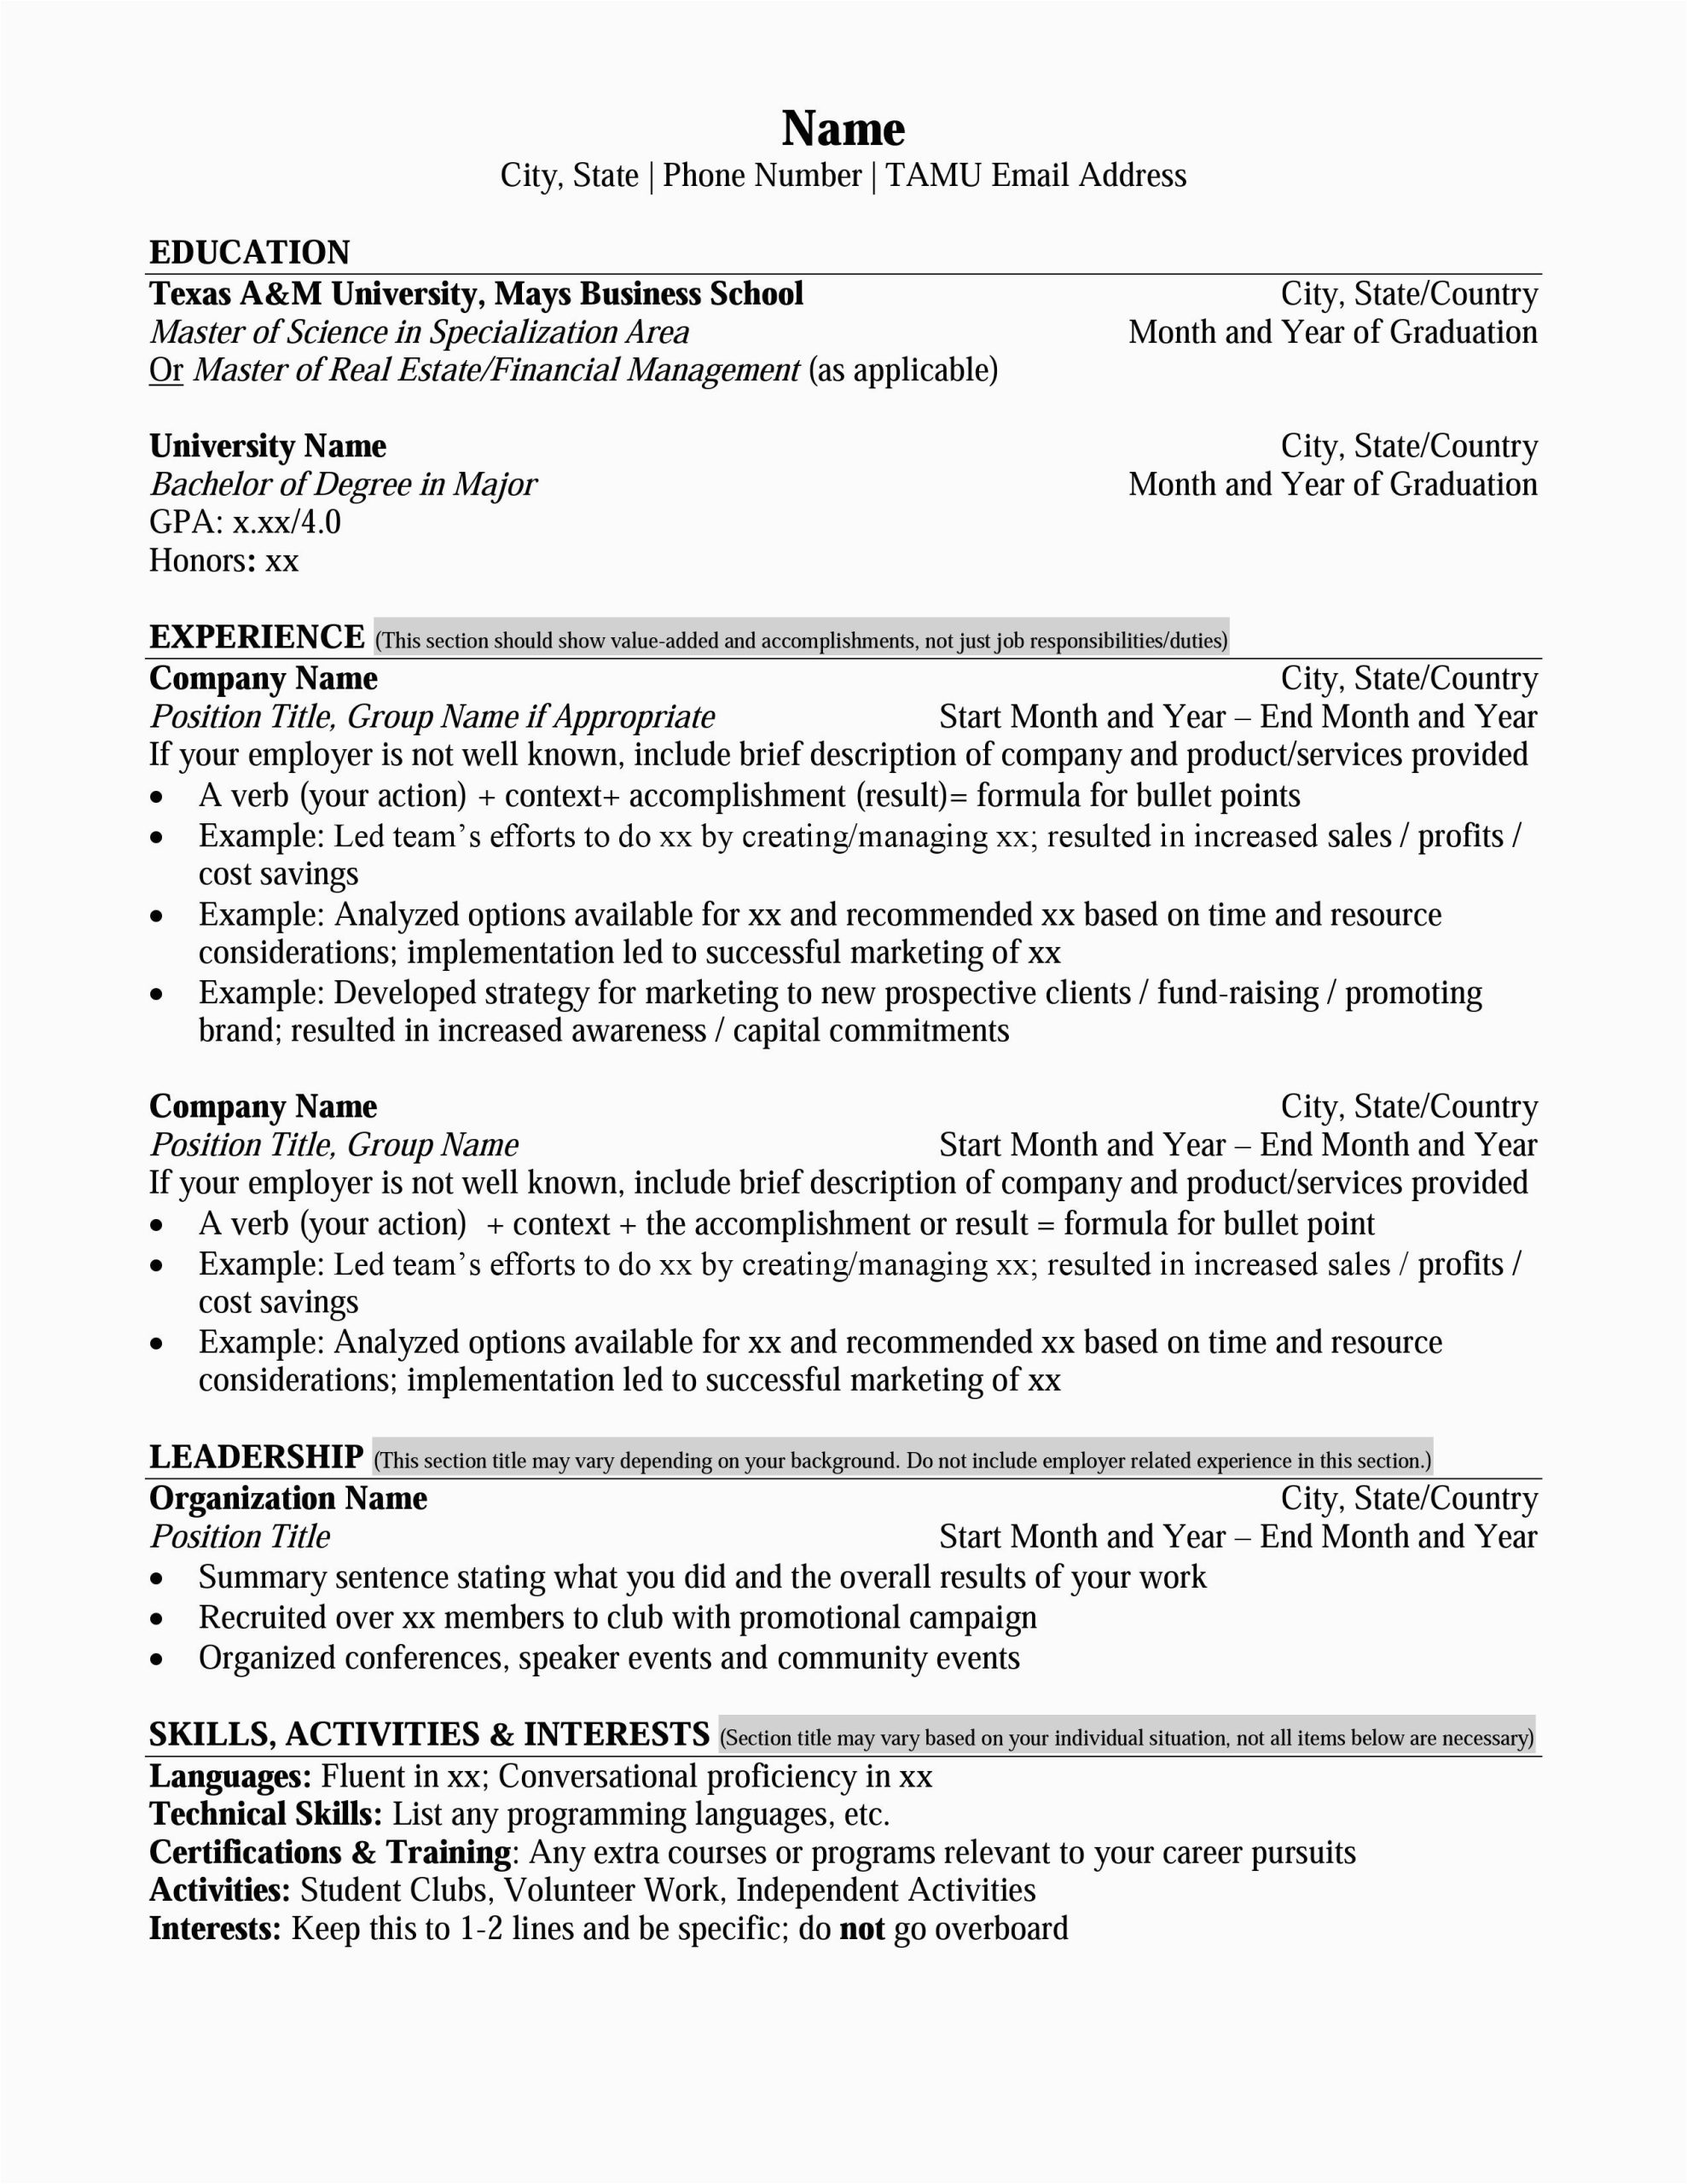 Sample Resume for College Applying Ms In Us Mays Masters Resume format – Career Management Center